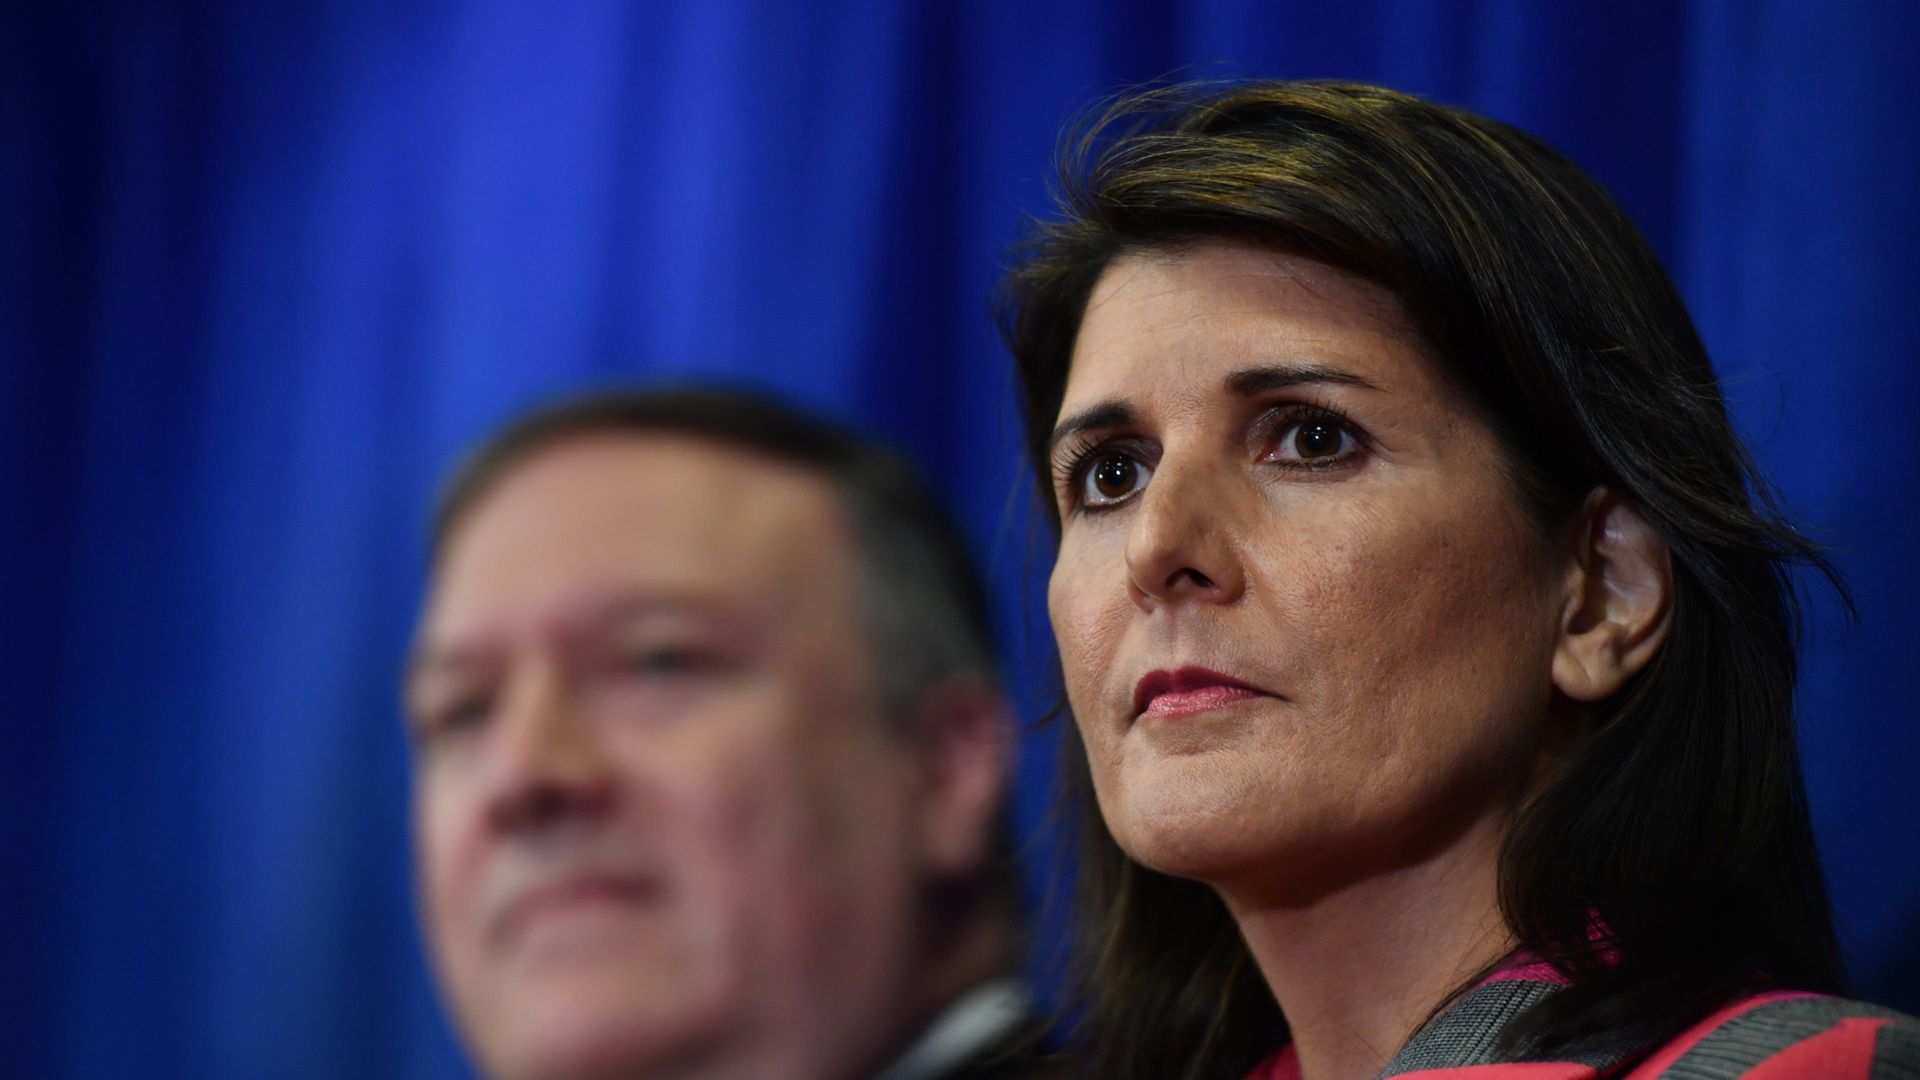 Nikki Haley pictured at a press conference